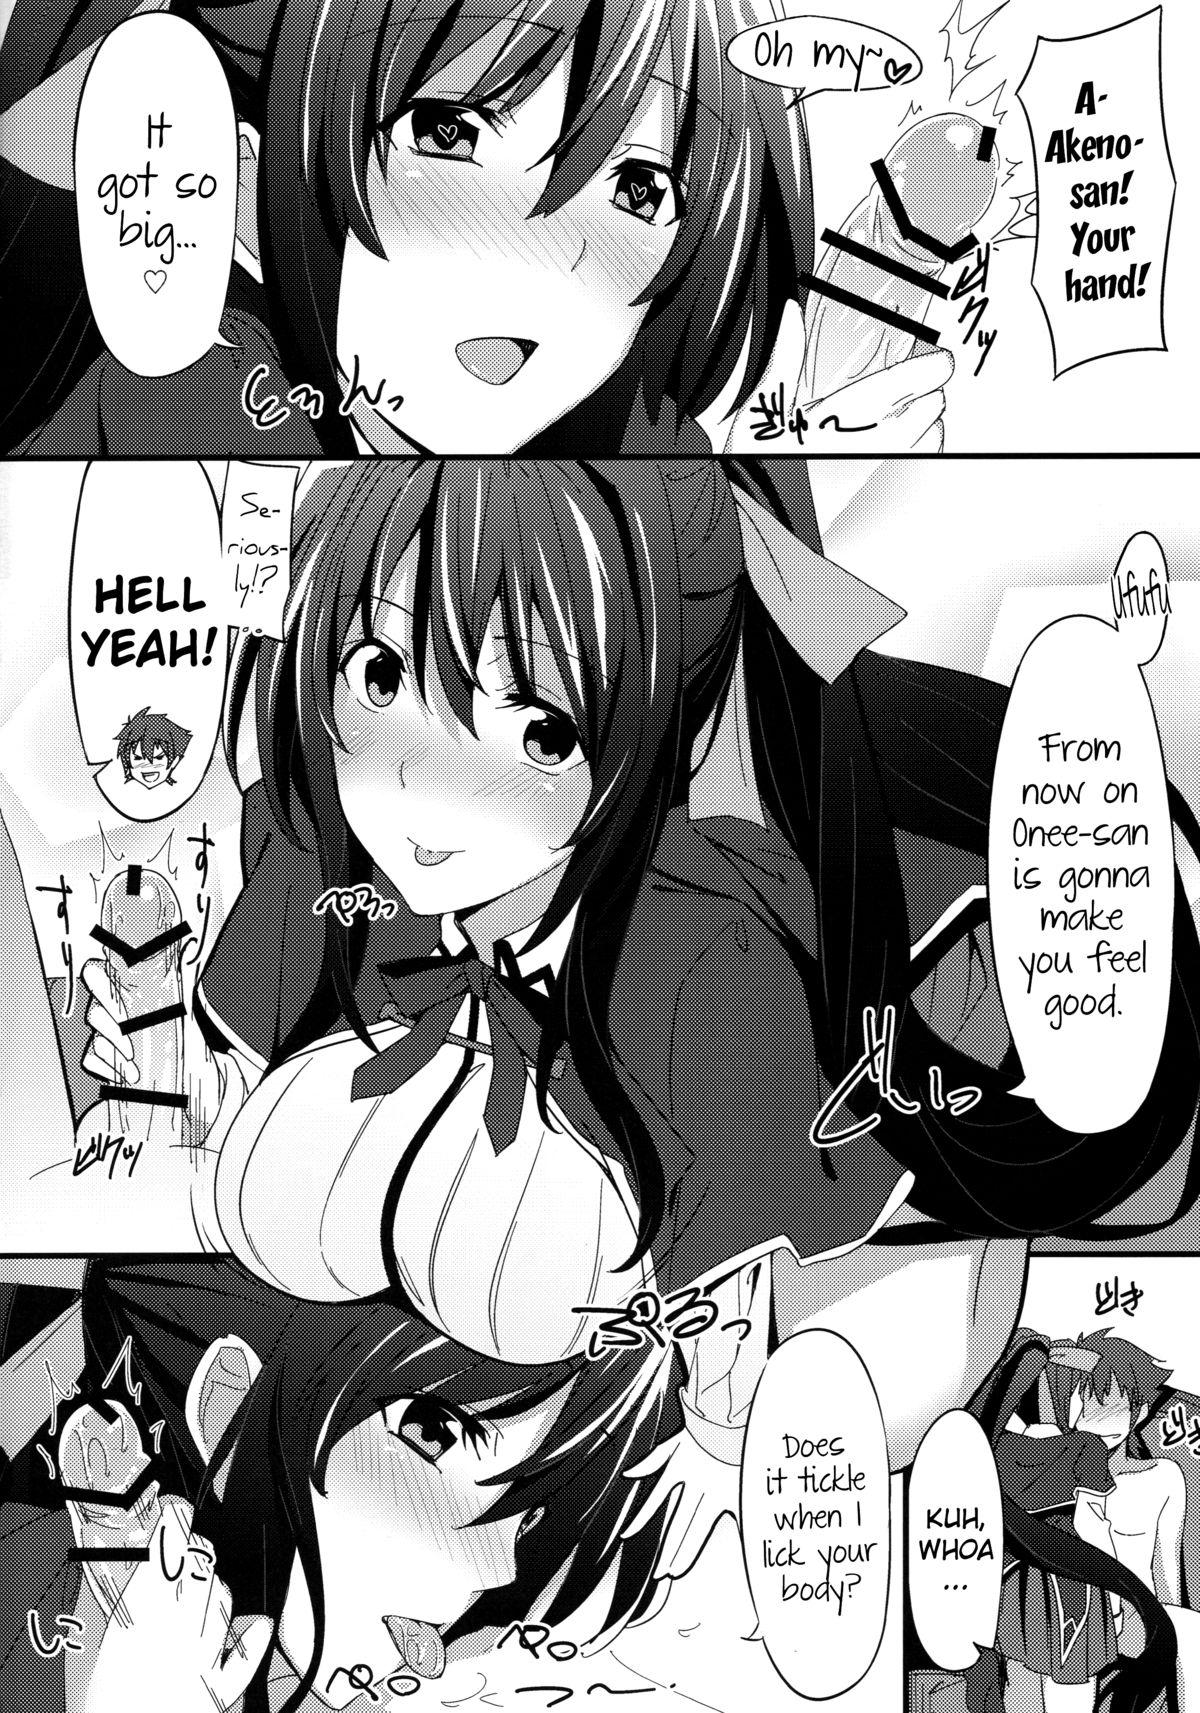 The Ero Hon 3 - Highschool dxd Bound - Page 5